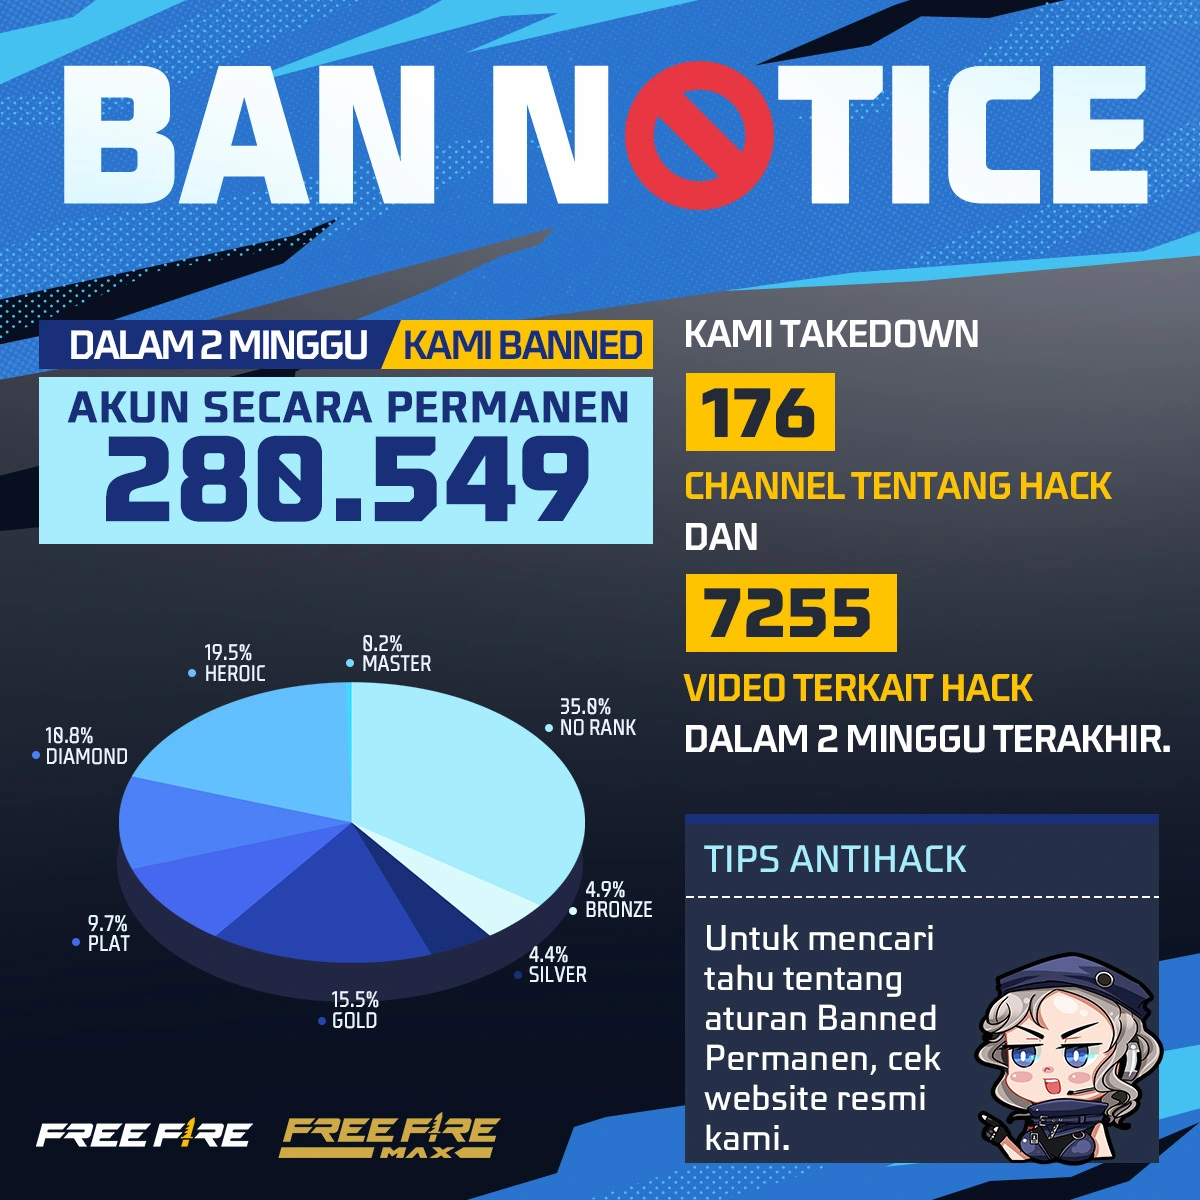 175,000 Free Fire MAX Cheater and Hacker Accounts Banned by Garena in the  Last 2 Weeks - MySmartPrice